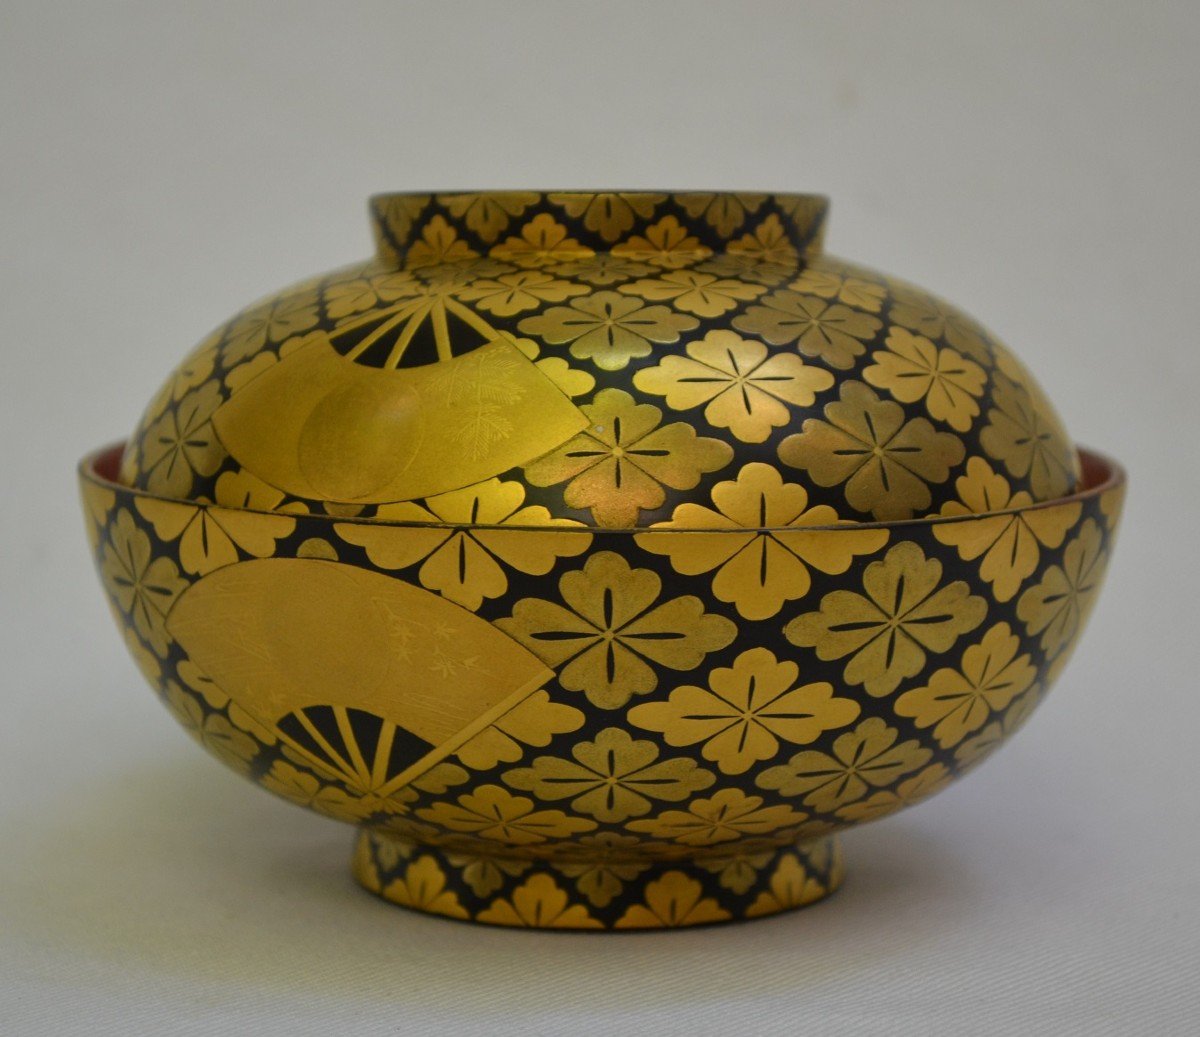 Covered Bowl In Gold Powdered Lacquer. Japan Edo Or Meiji Period, 19th Century.